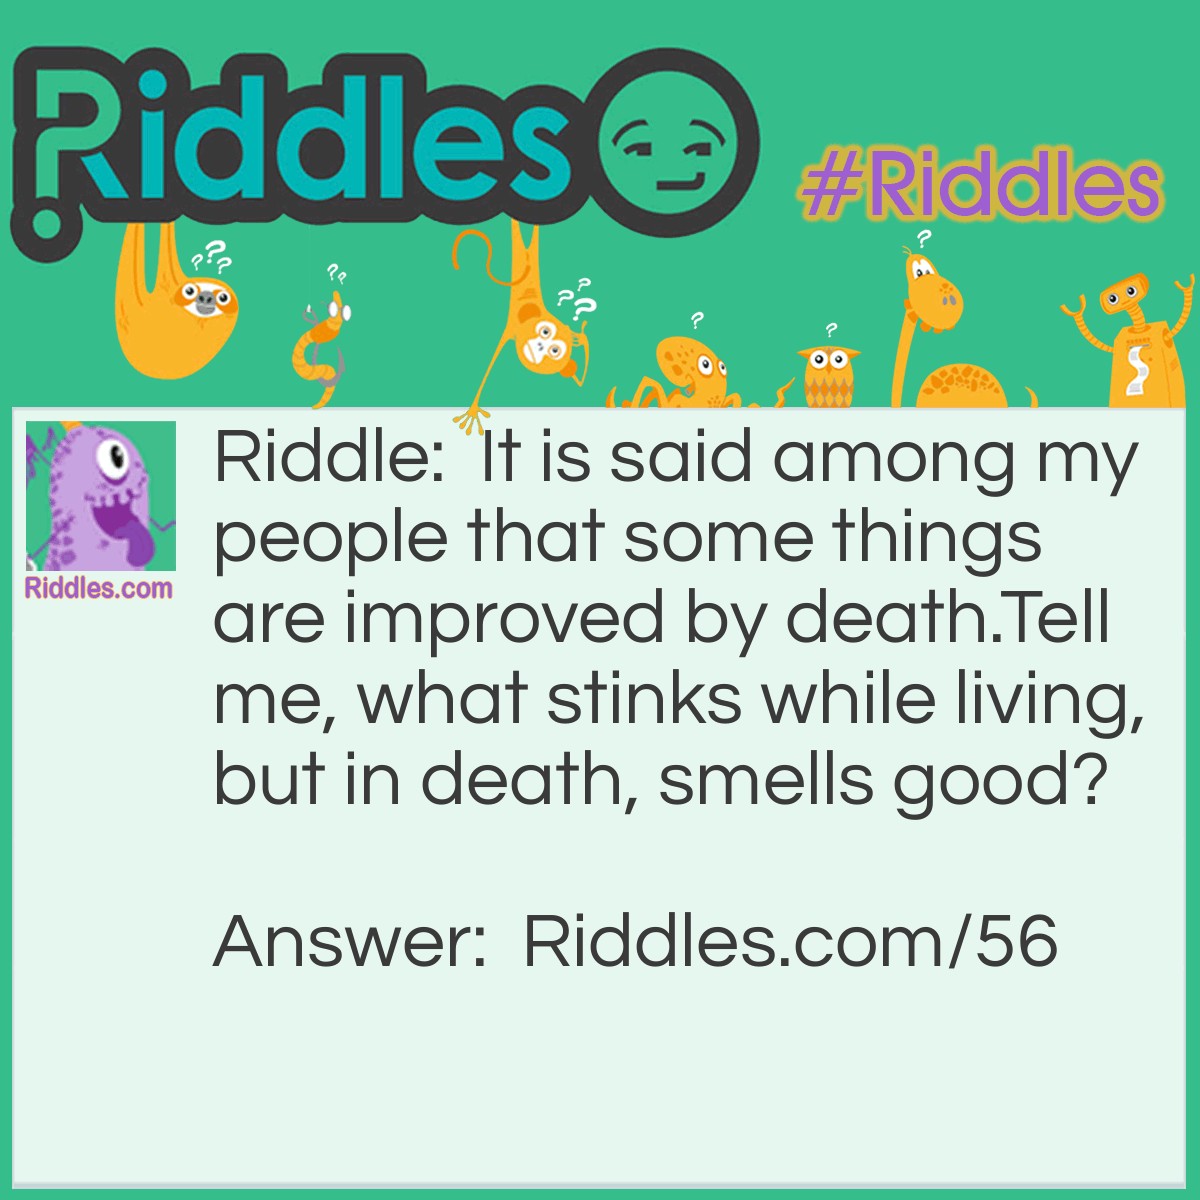 Riddle: It is said among my people that some things are improved by death. Tell me, what stinks while living, but in death, smells good? Answer: A Pig.